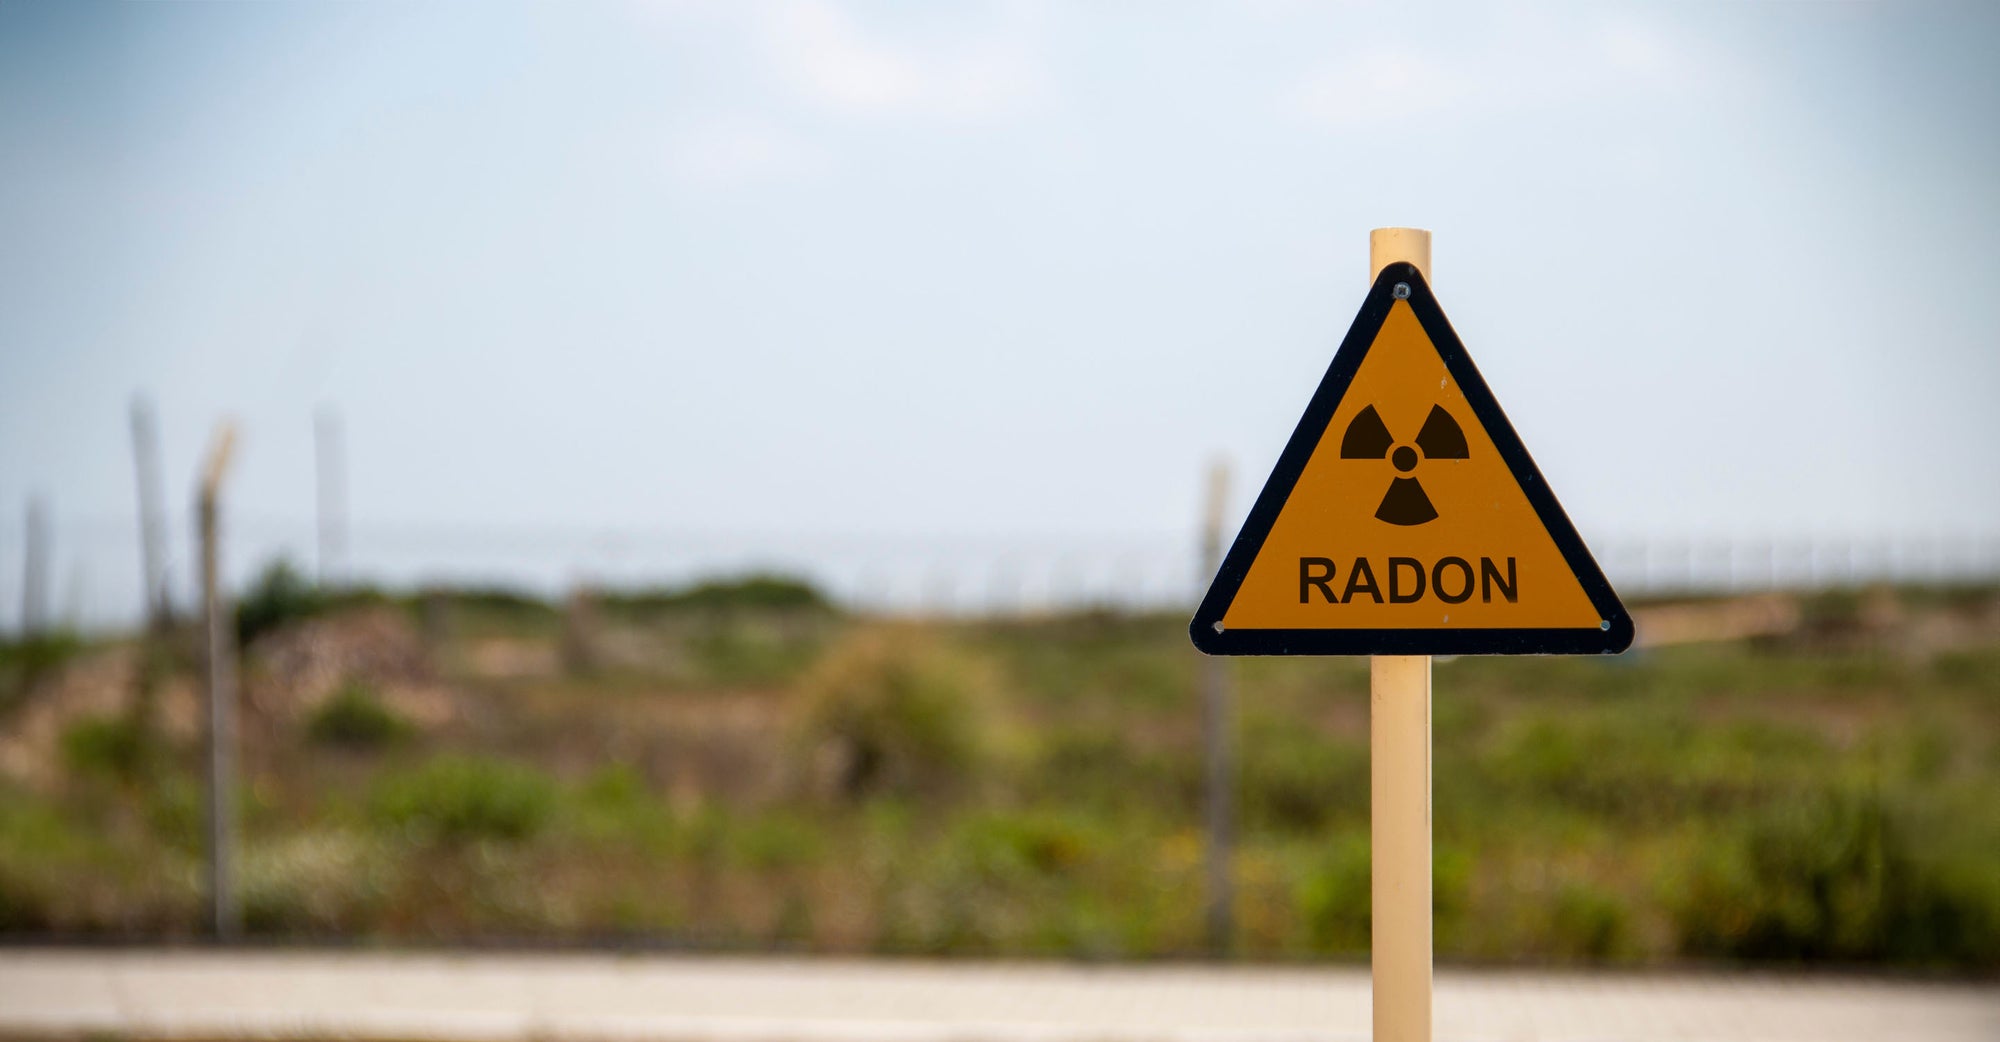 What is radon? Learn about this dangerous gas found in homes